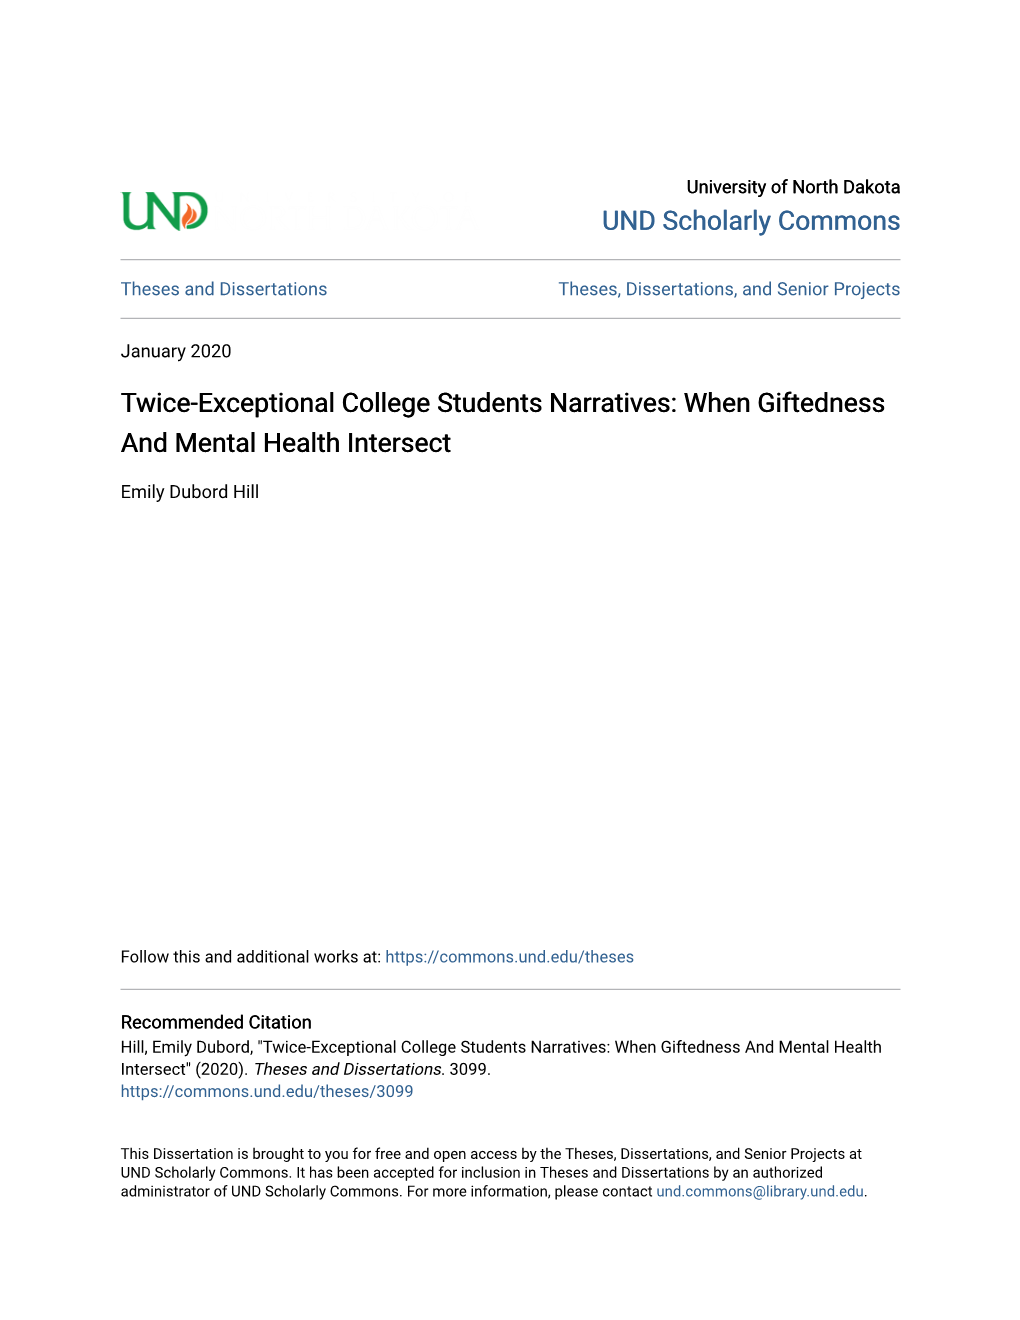 Twice-Exceptional College Students Narratives: When Giftedness and Mental Health Intersect